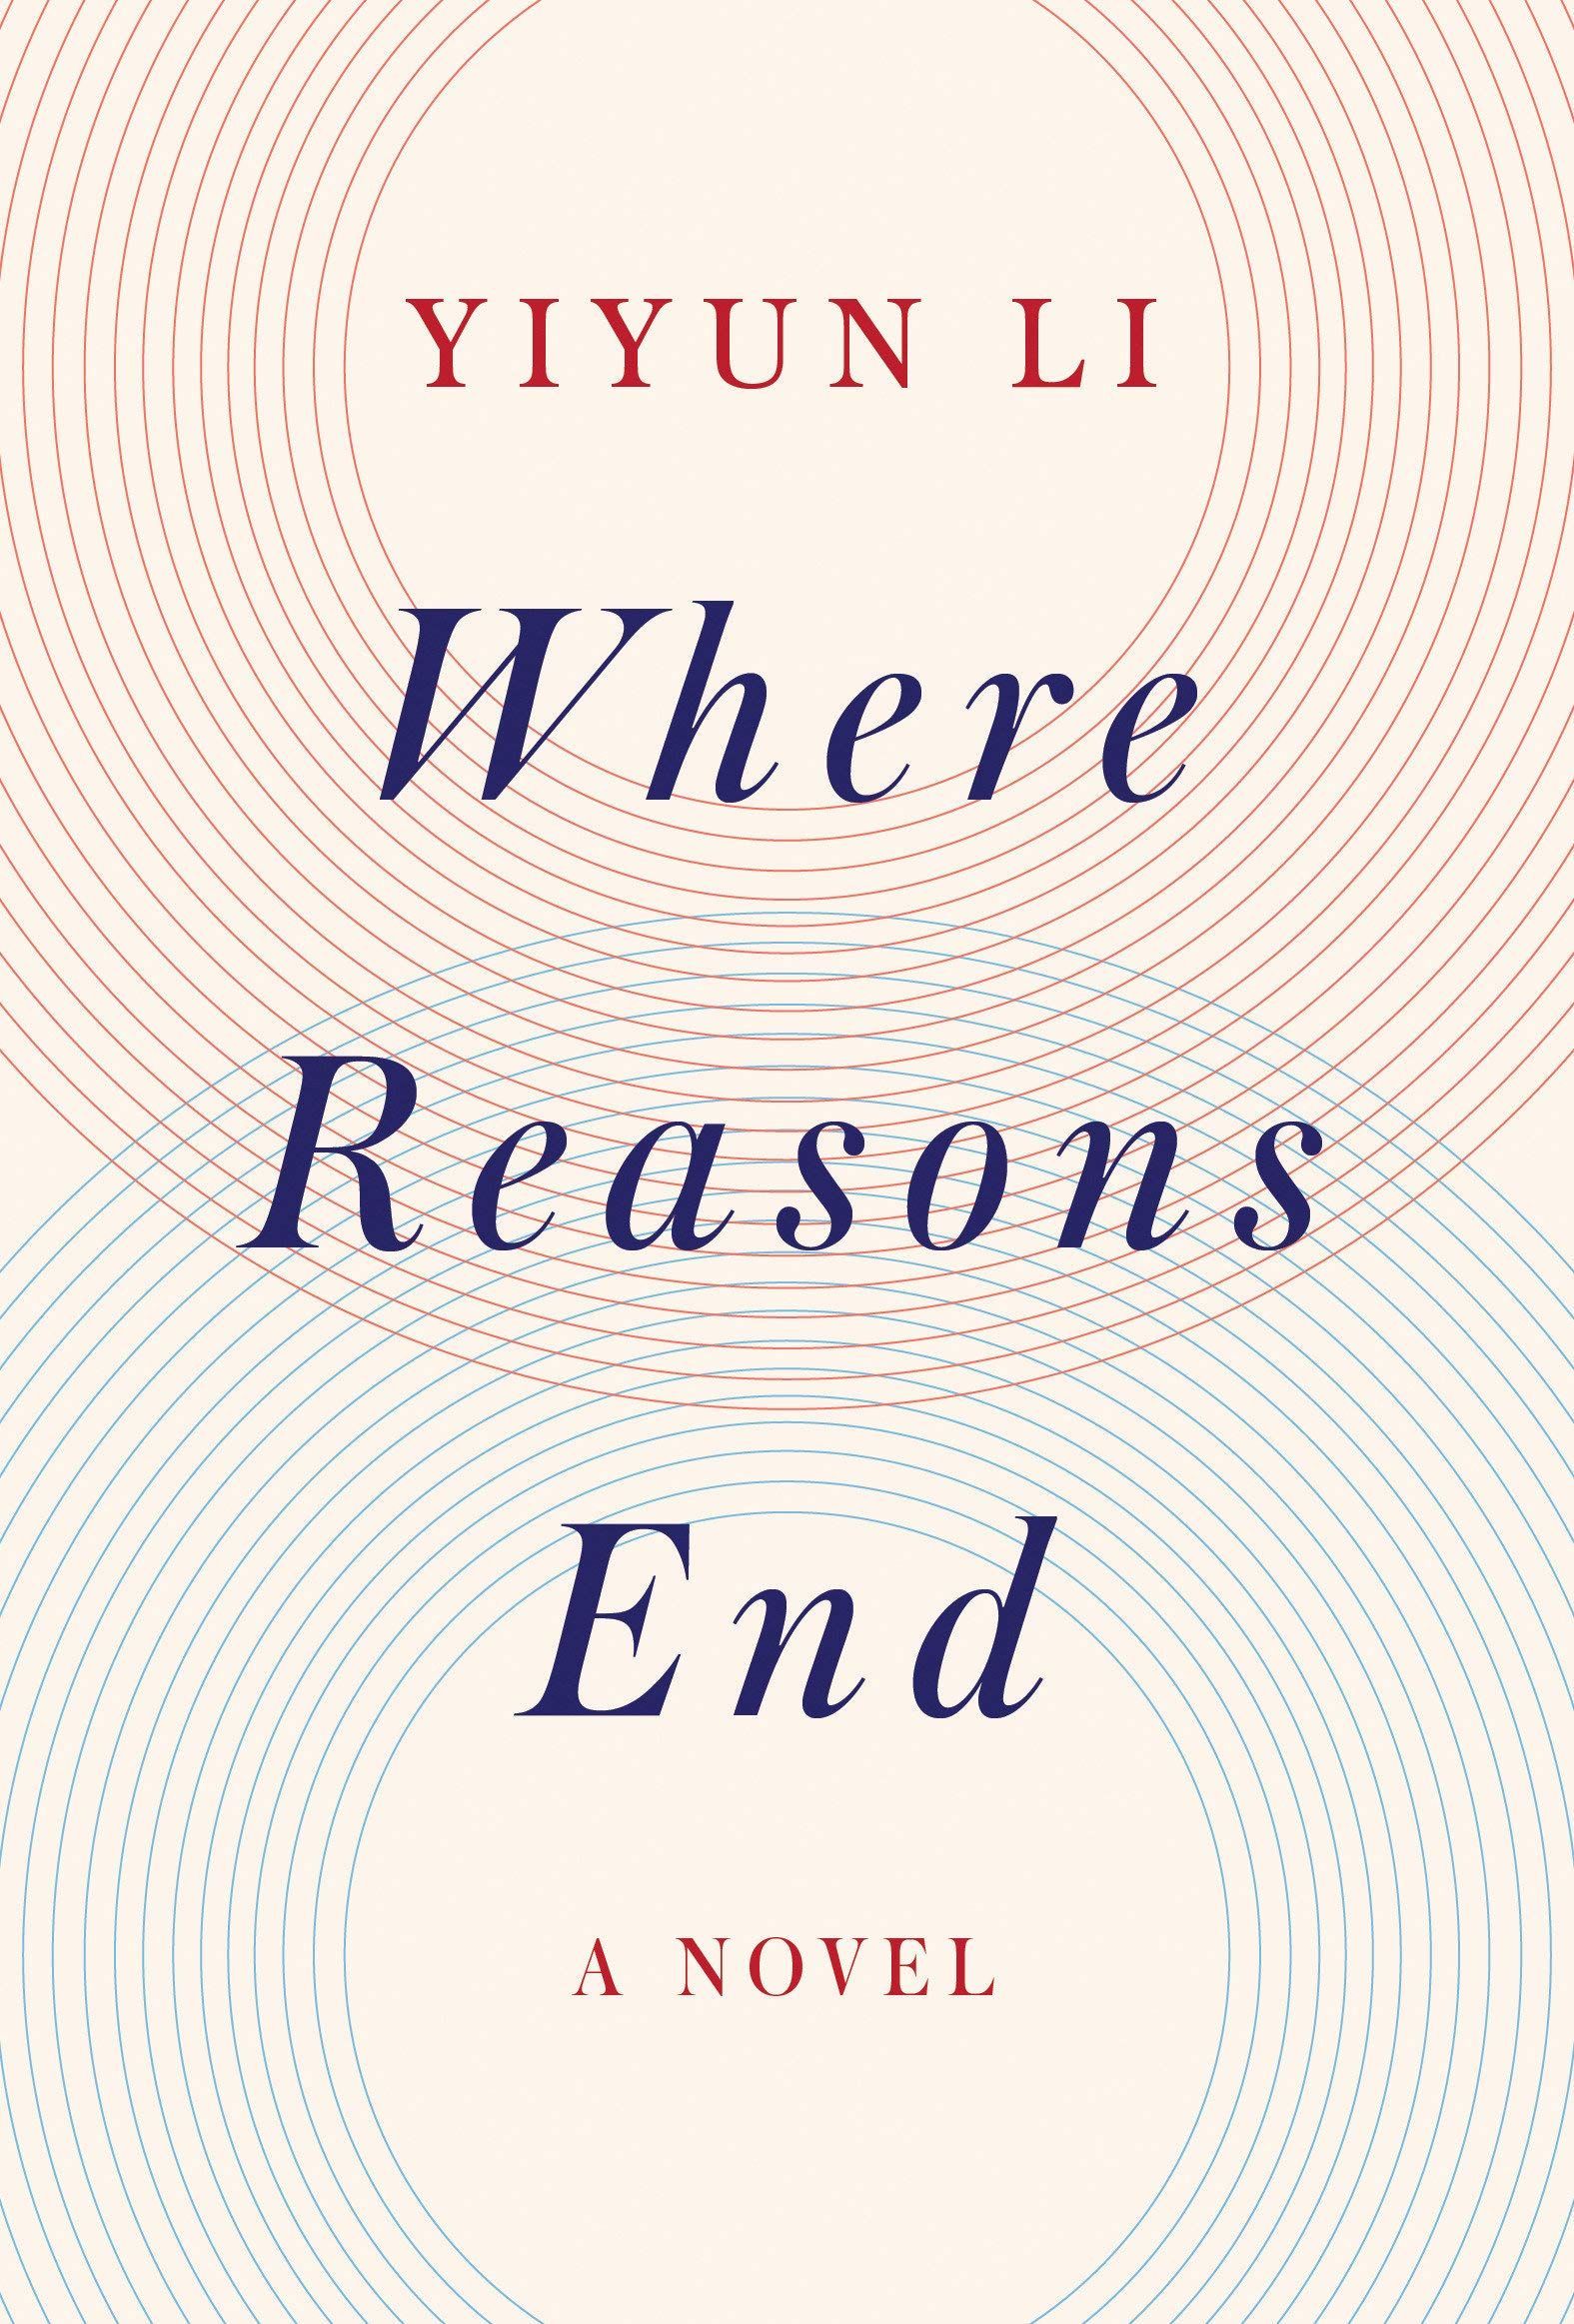 Communing with the Dead: On Yiyun Li’s “Where Reasons End”